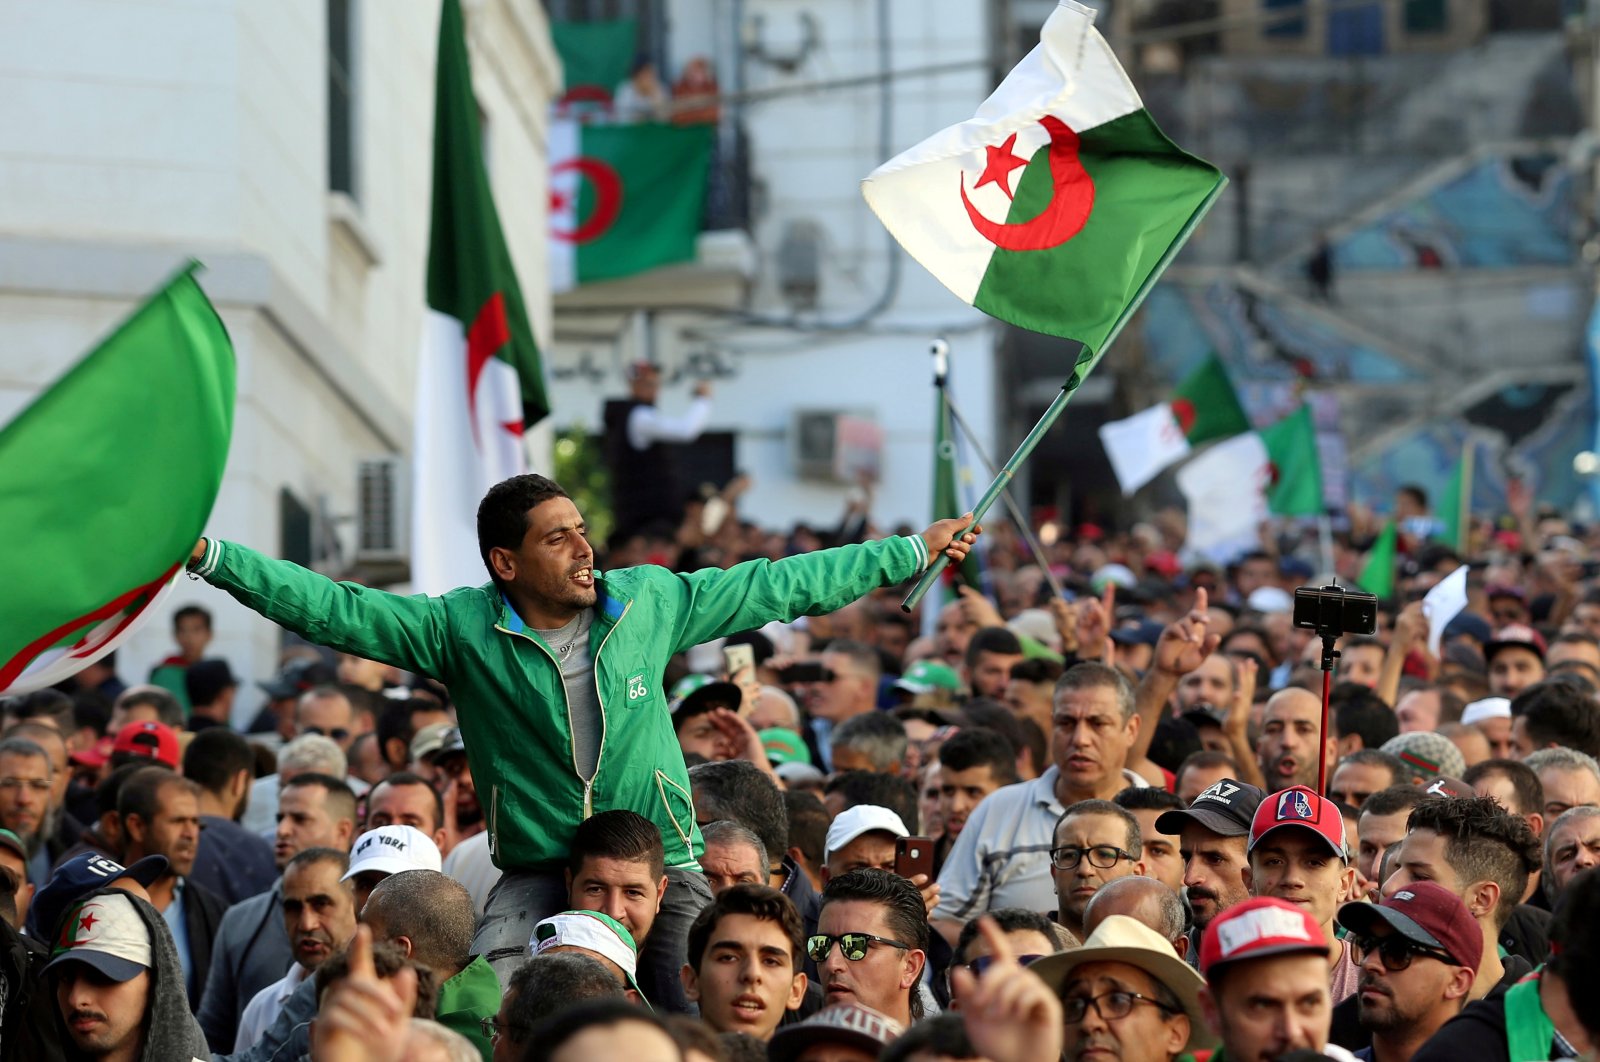 Demonstrators carry national flags during a protest in the capital Algiers, Algeria, Oct. 25, 2019. (REUTERS Photo)